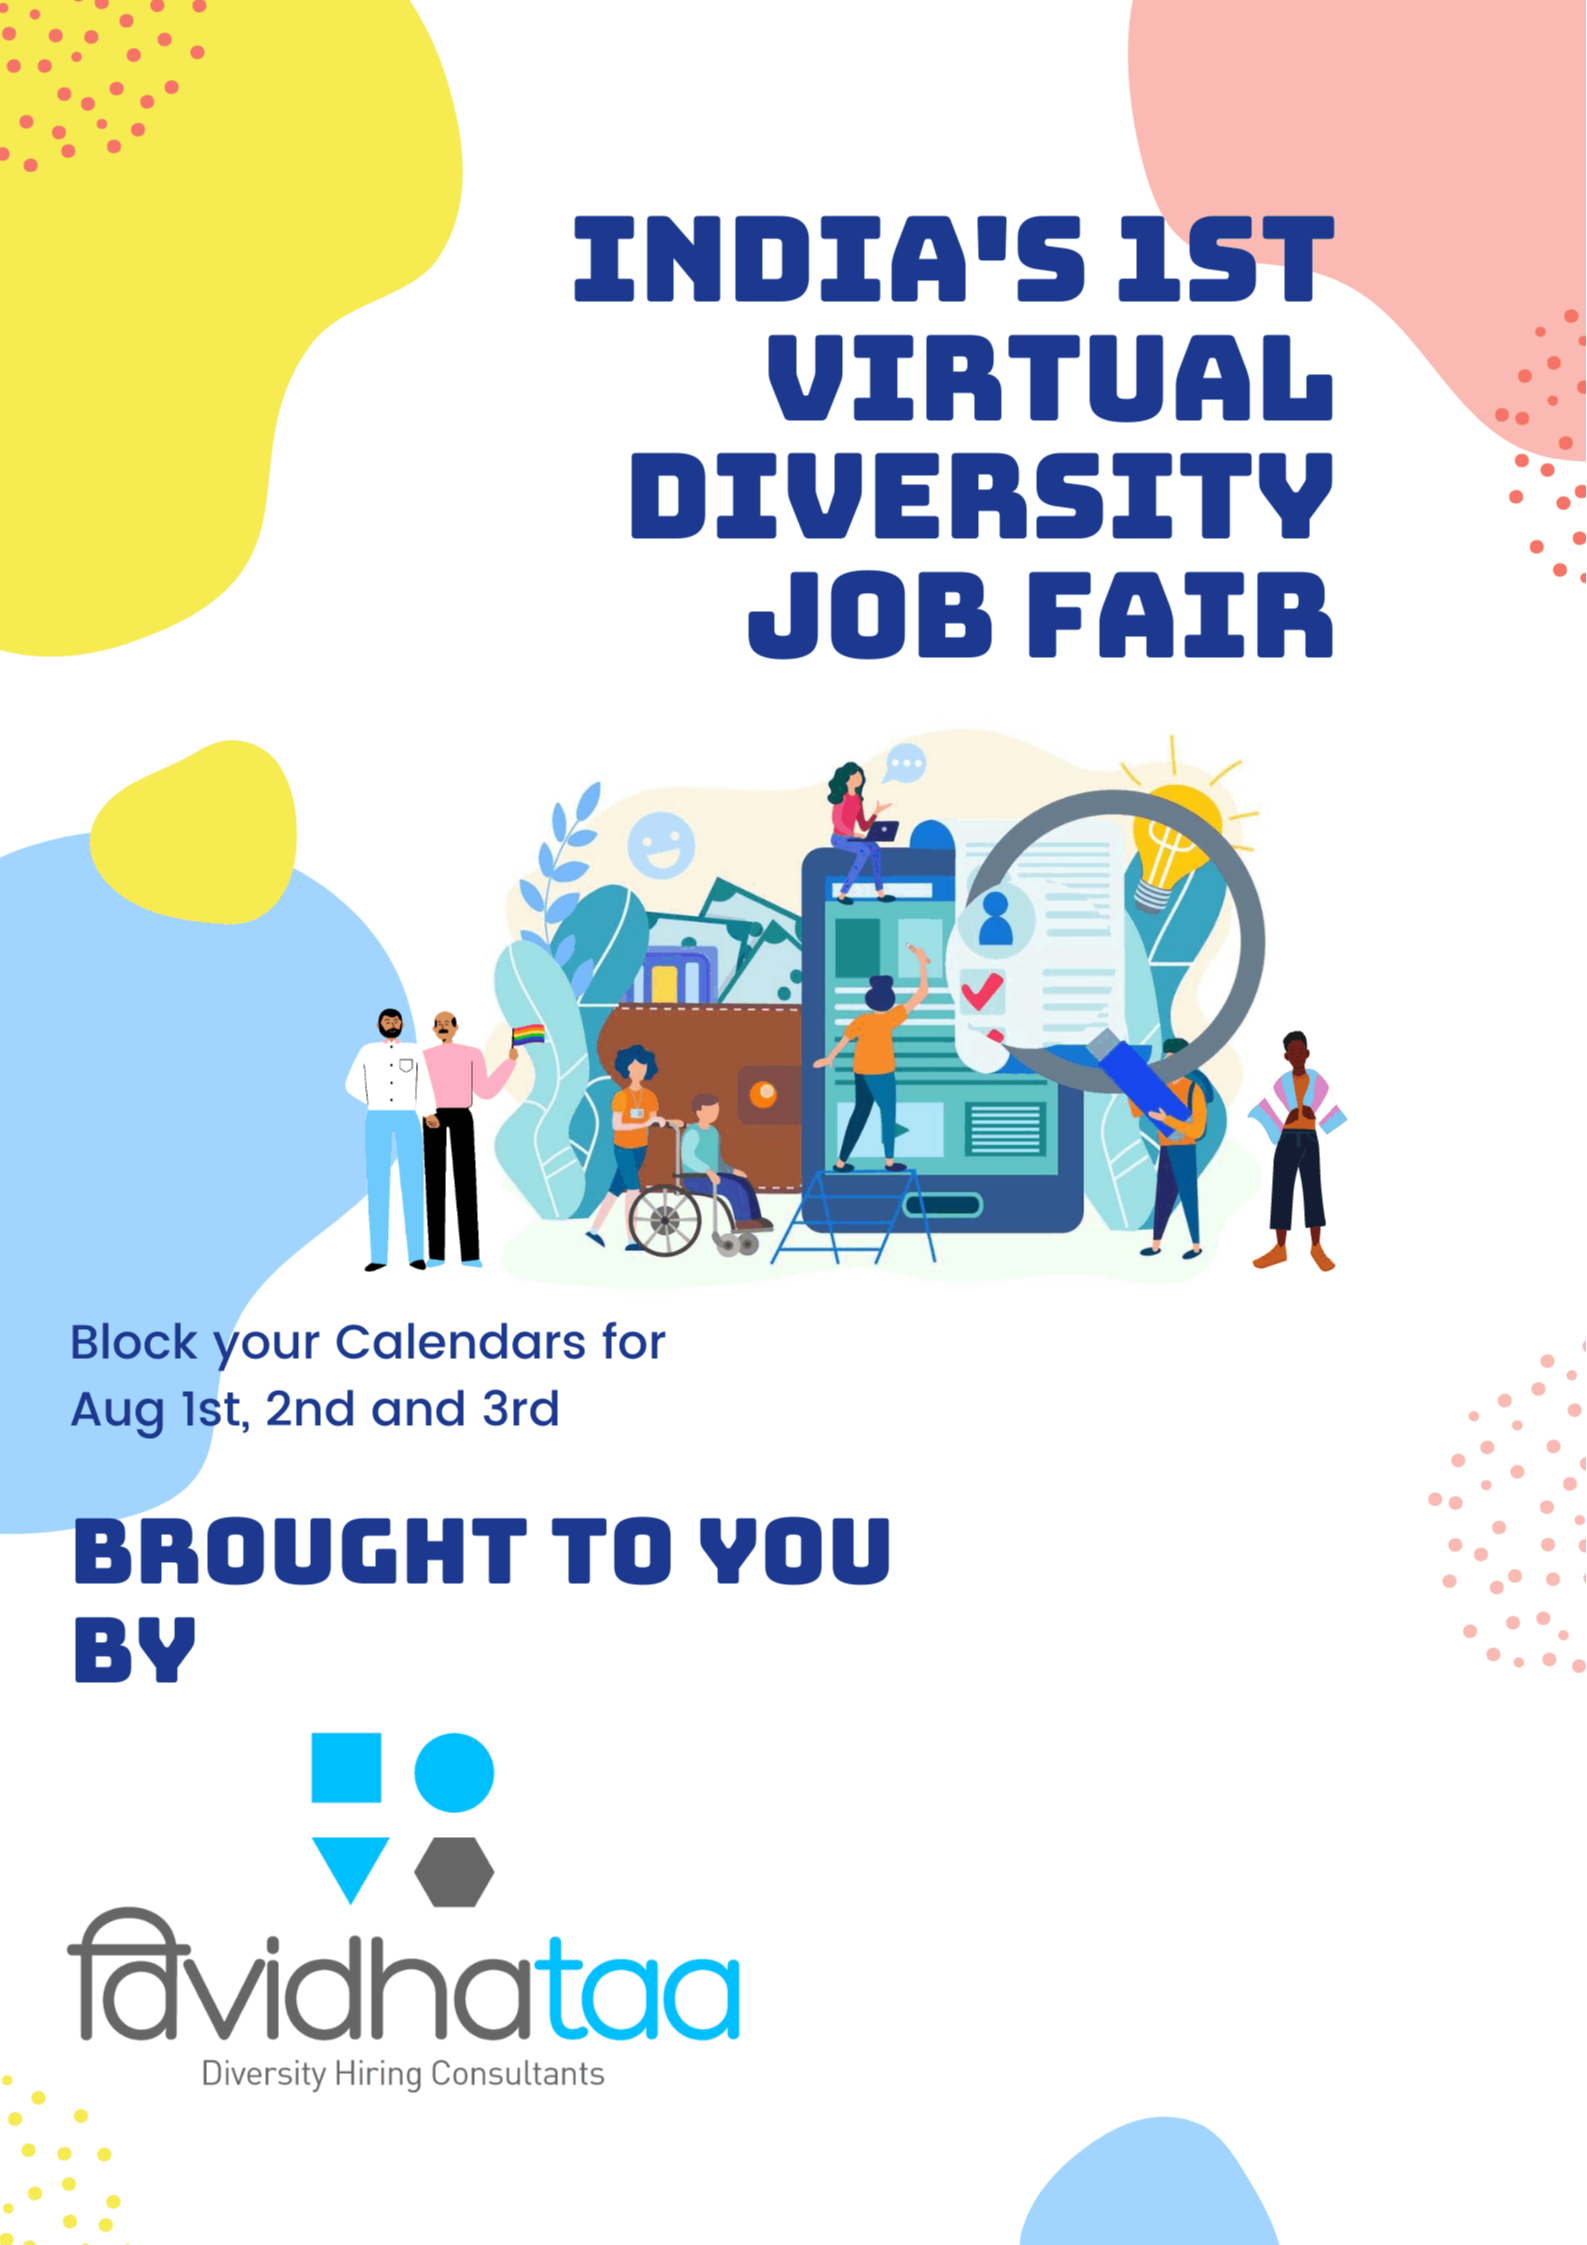 India's 1st Virtual Diversity Job Fair 2020 - 1st, 2nd, 3rd Aug - Launch poster shows Women, ppl with disabilities and Women - Click to register yourself